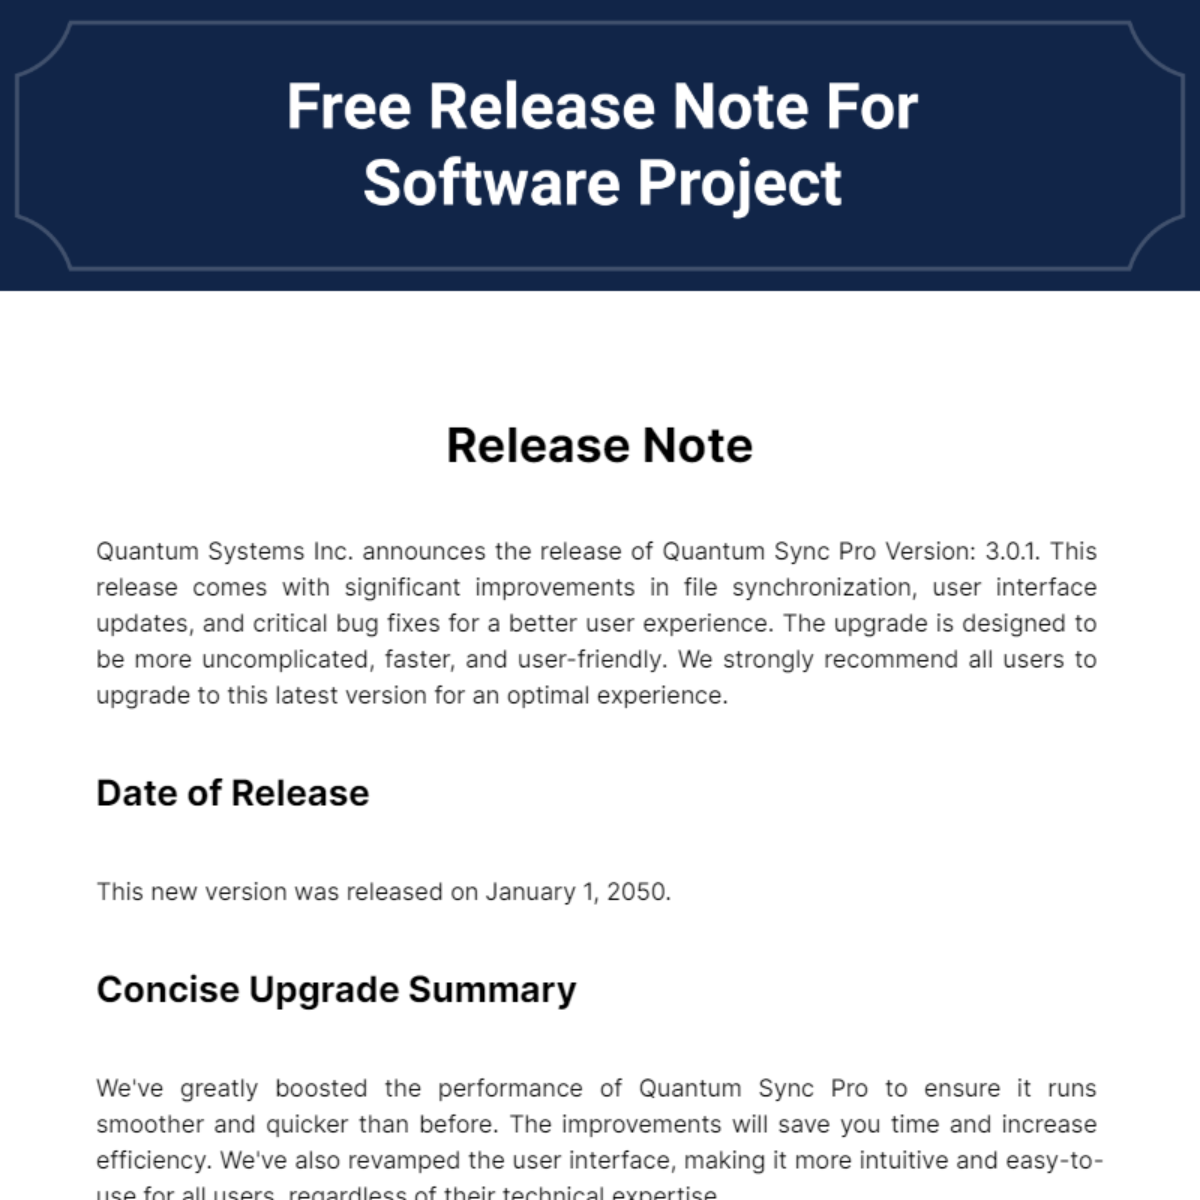 Free Release Note For Software Project Template